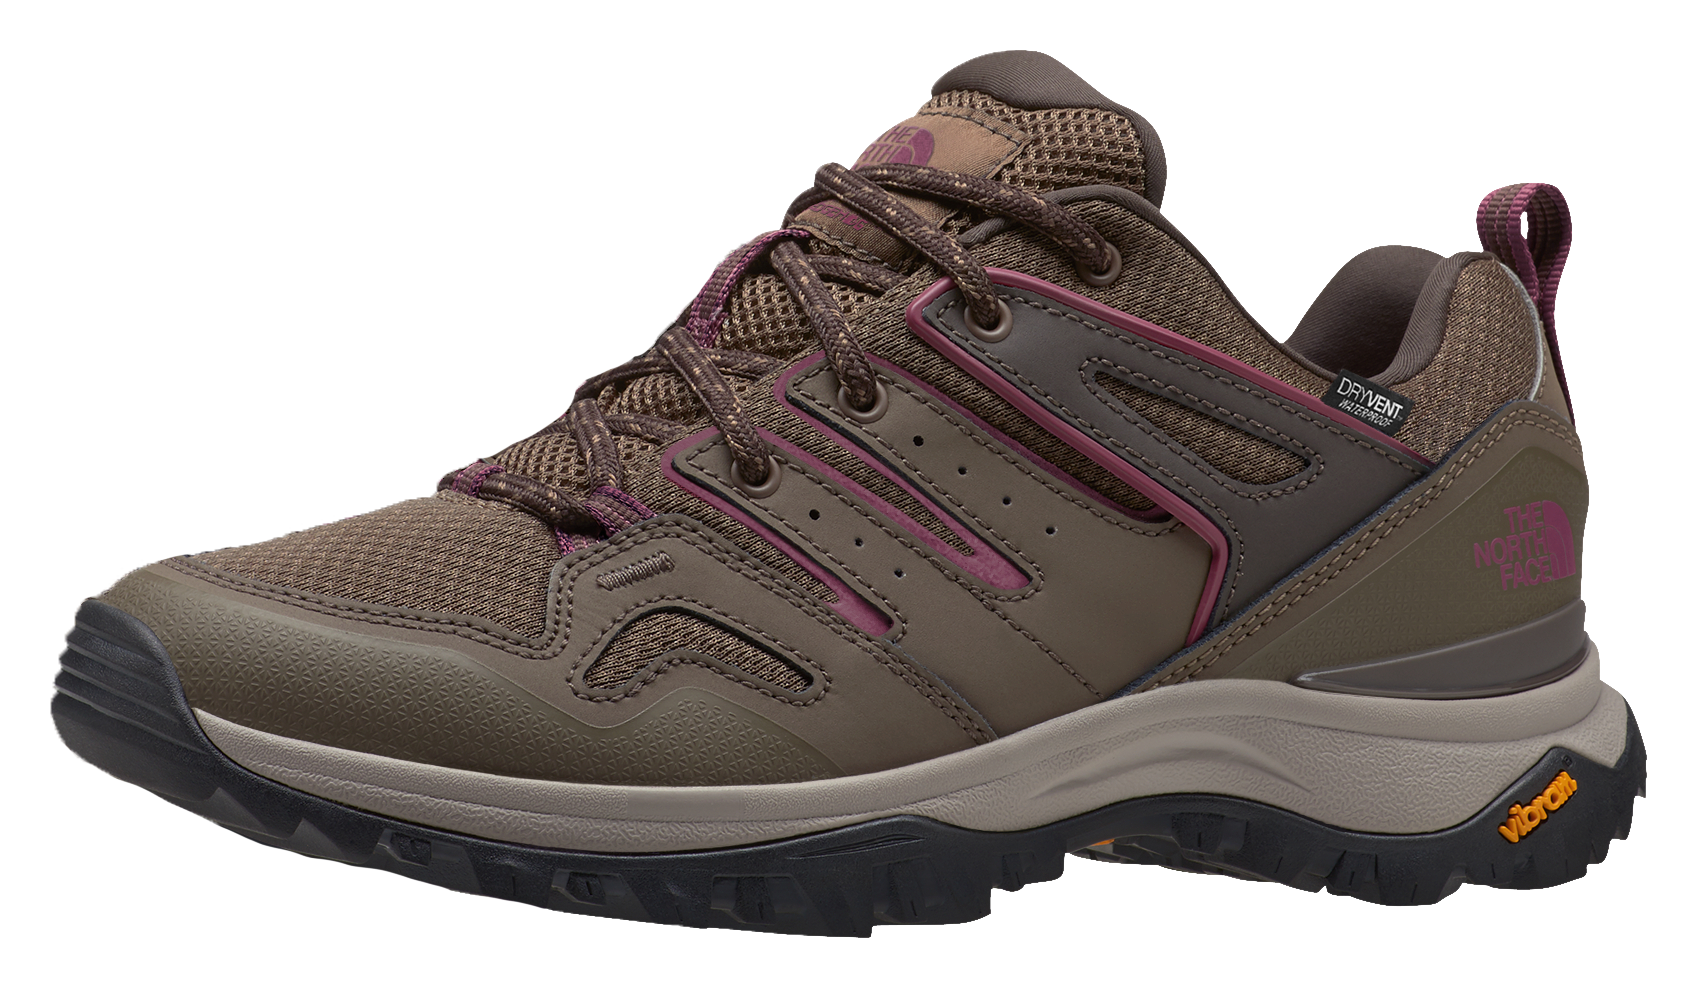 The North Face Hedgehog Fastpack II Low Waterproof Hiking Boots for Ladies